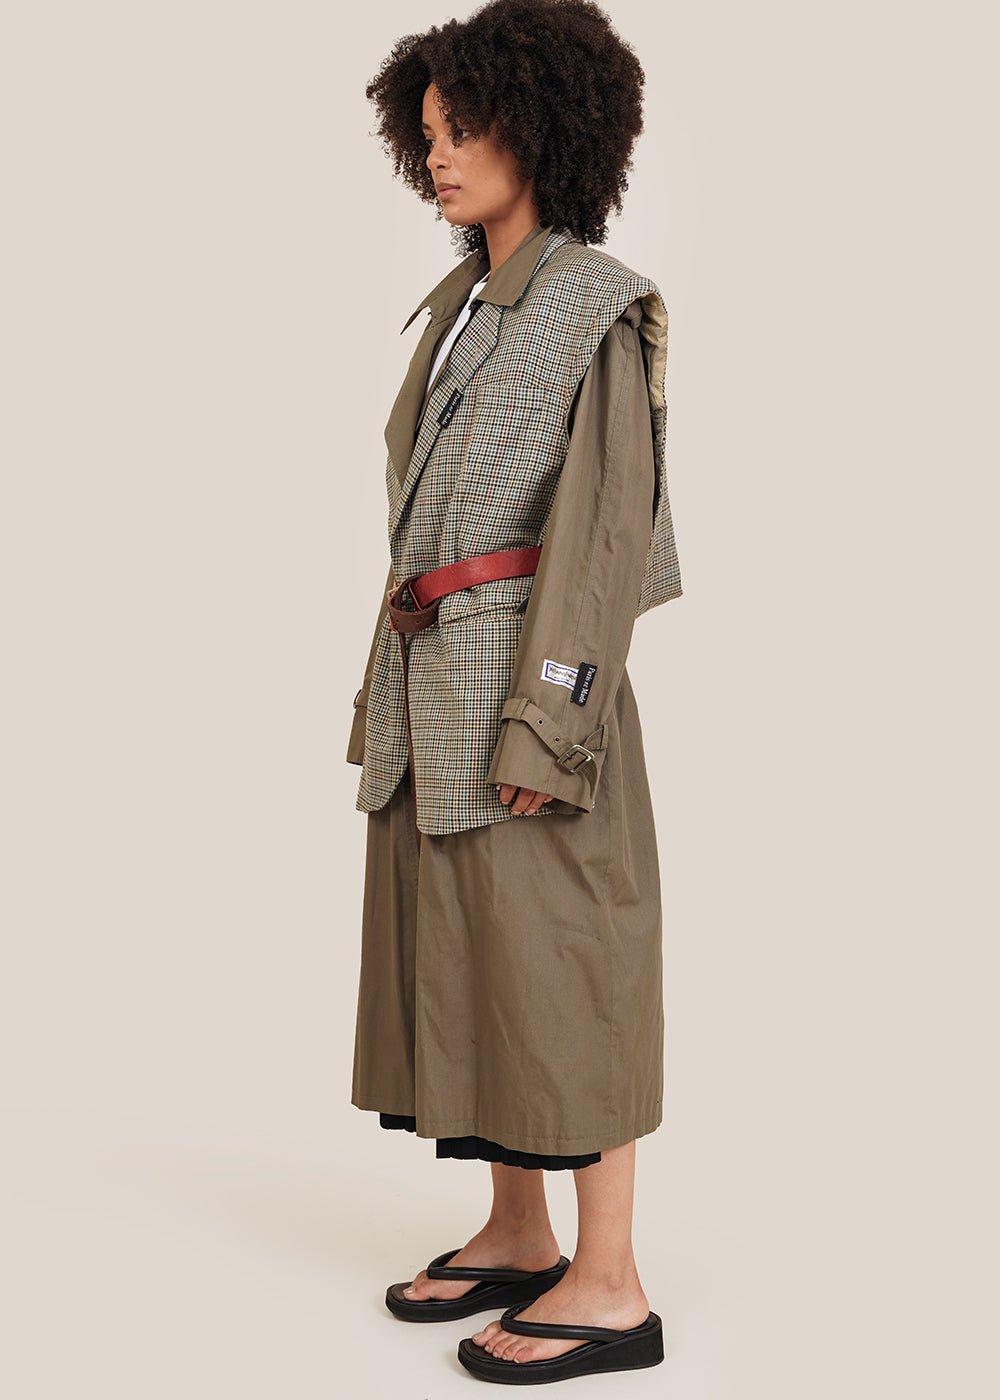 Paris RE Made YSL Trench x Blazer Coat - New Classics Studios Sustainable Ethical Fashion Canada